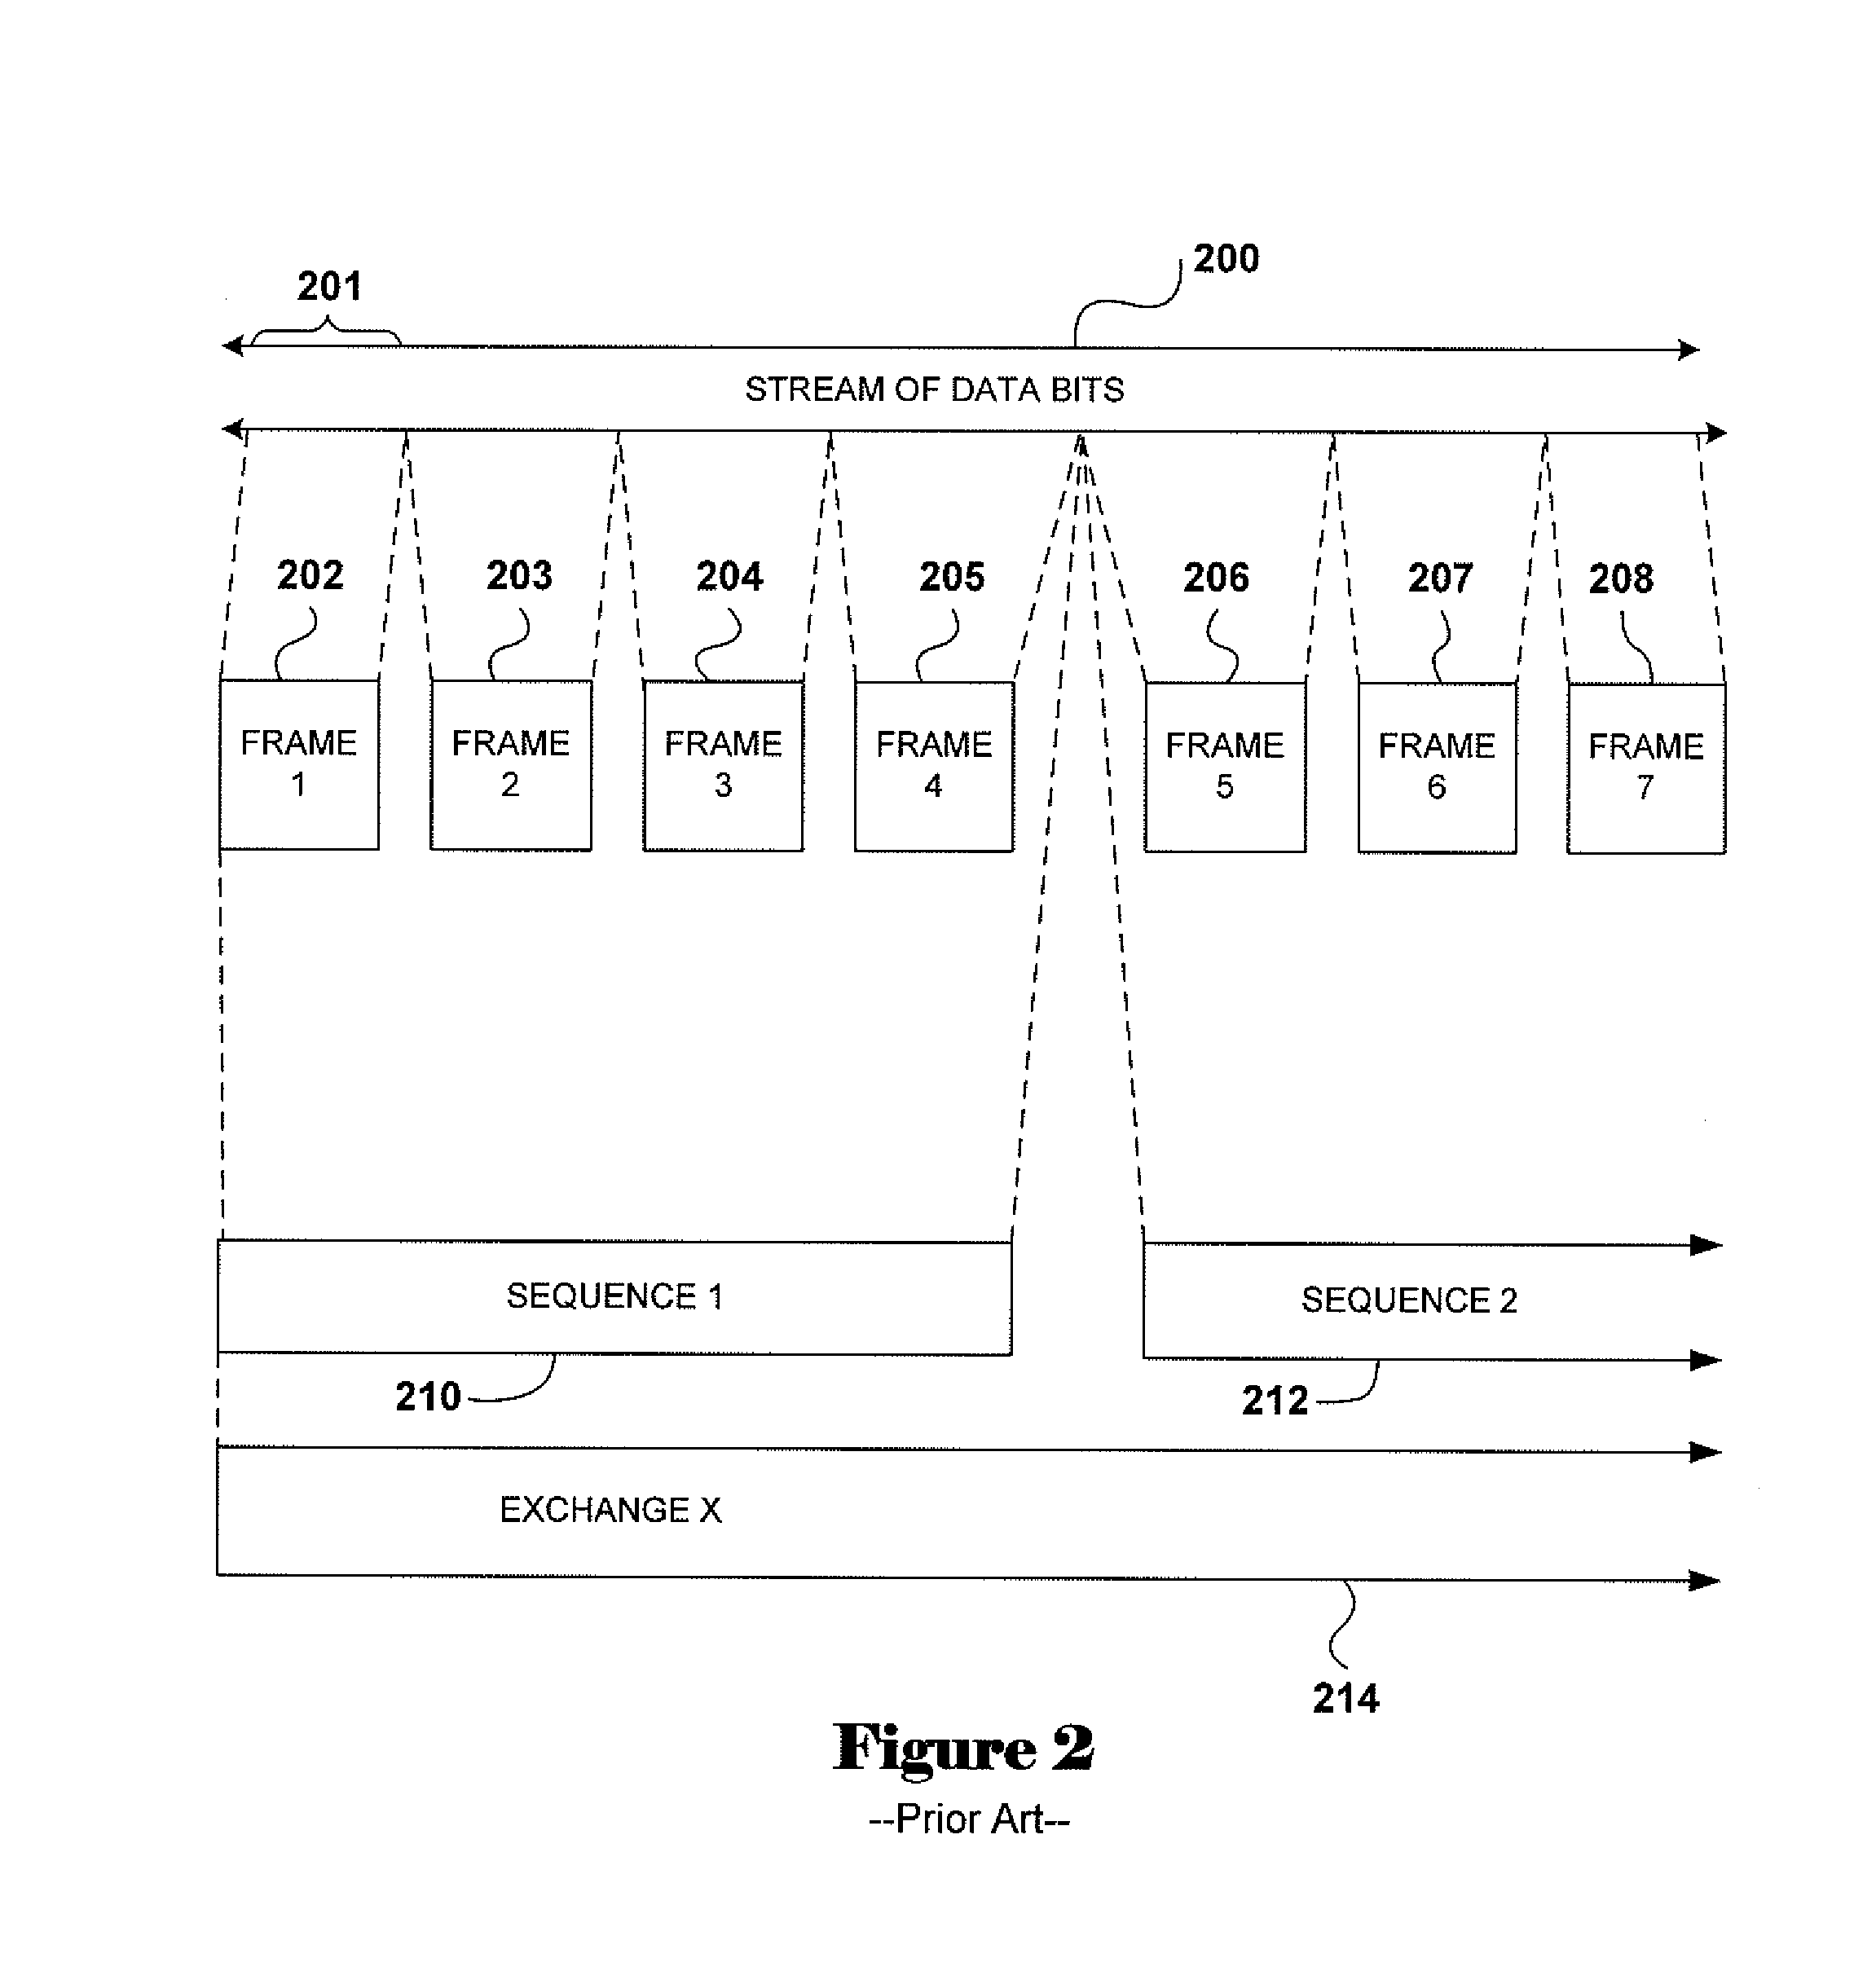 Alignment-unit-based virtual formatting methods and devices employing the methods